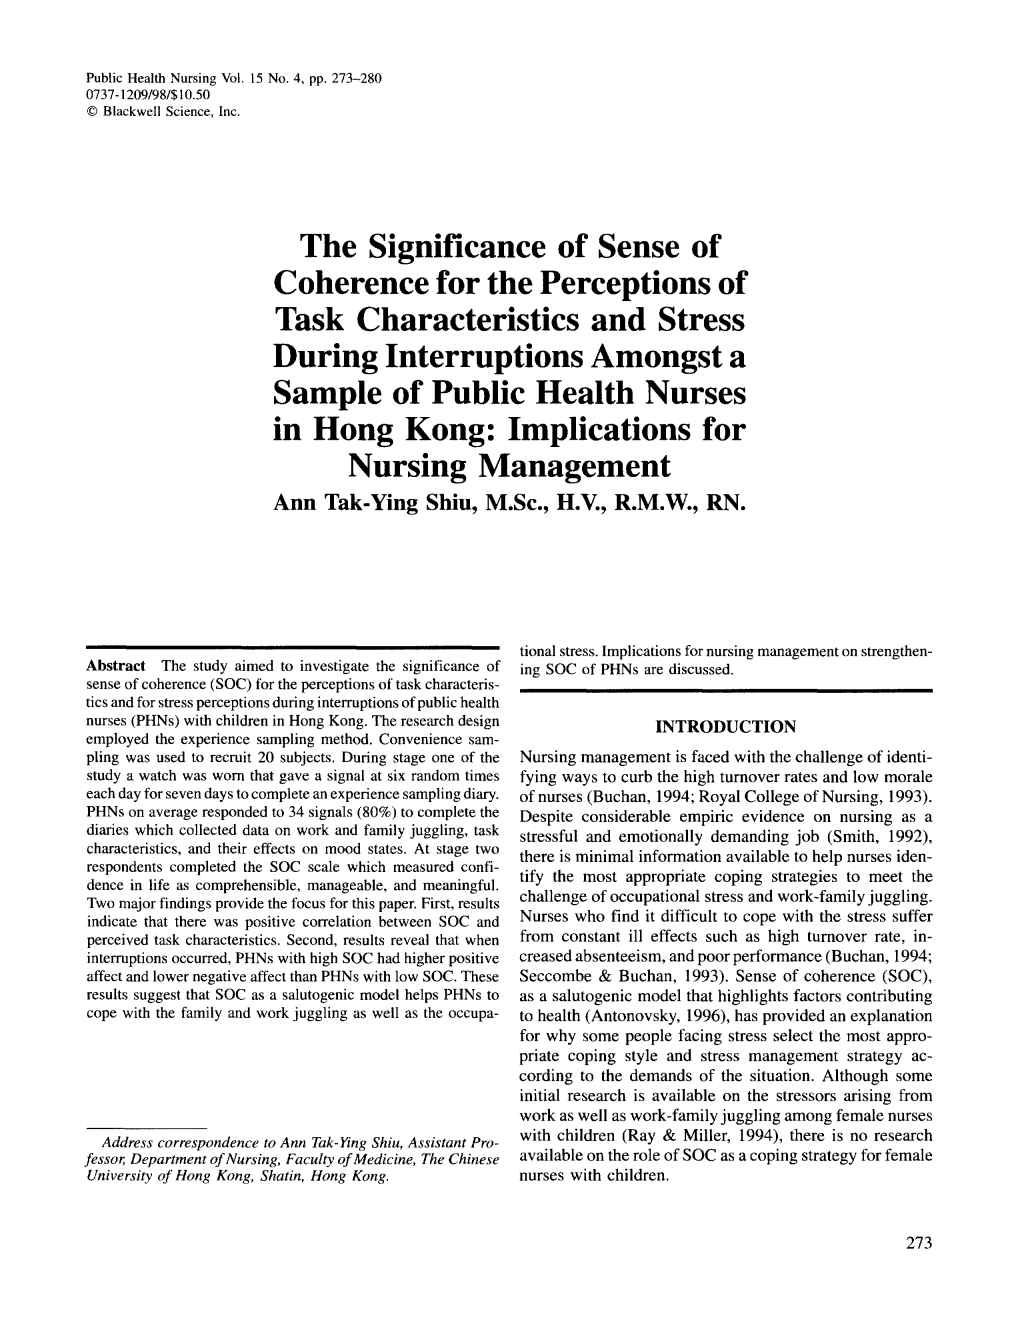 The Significance of Sense of Coherence for the Perceptions of Task Characteristics and Stress During Interruptions Amongst A